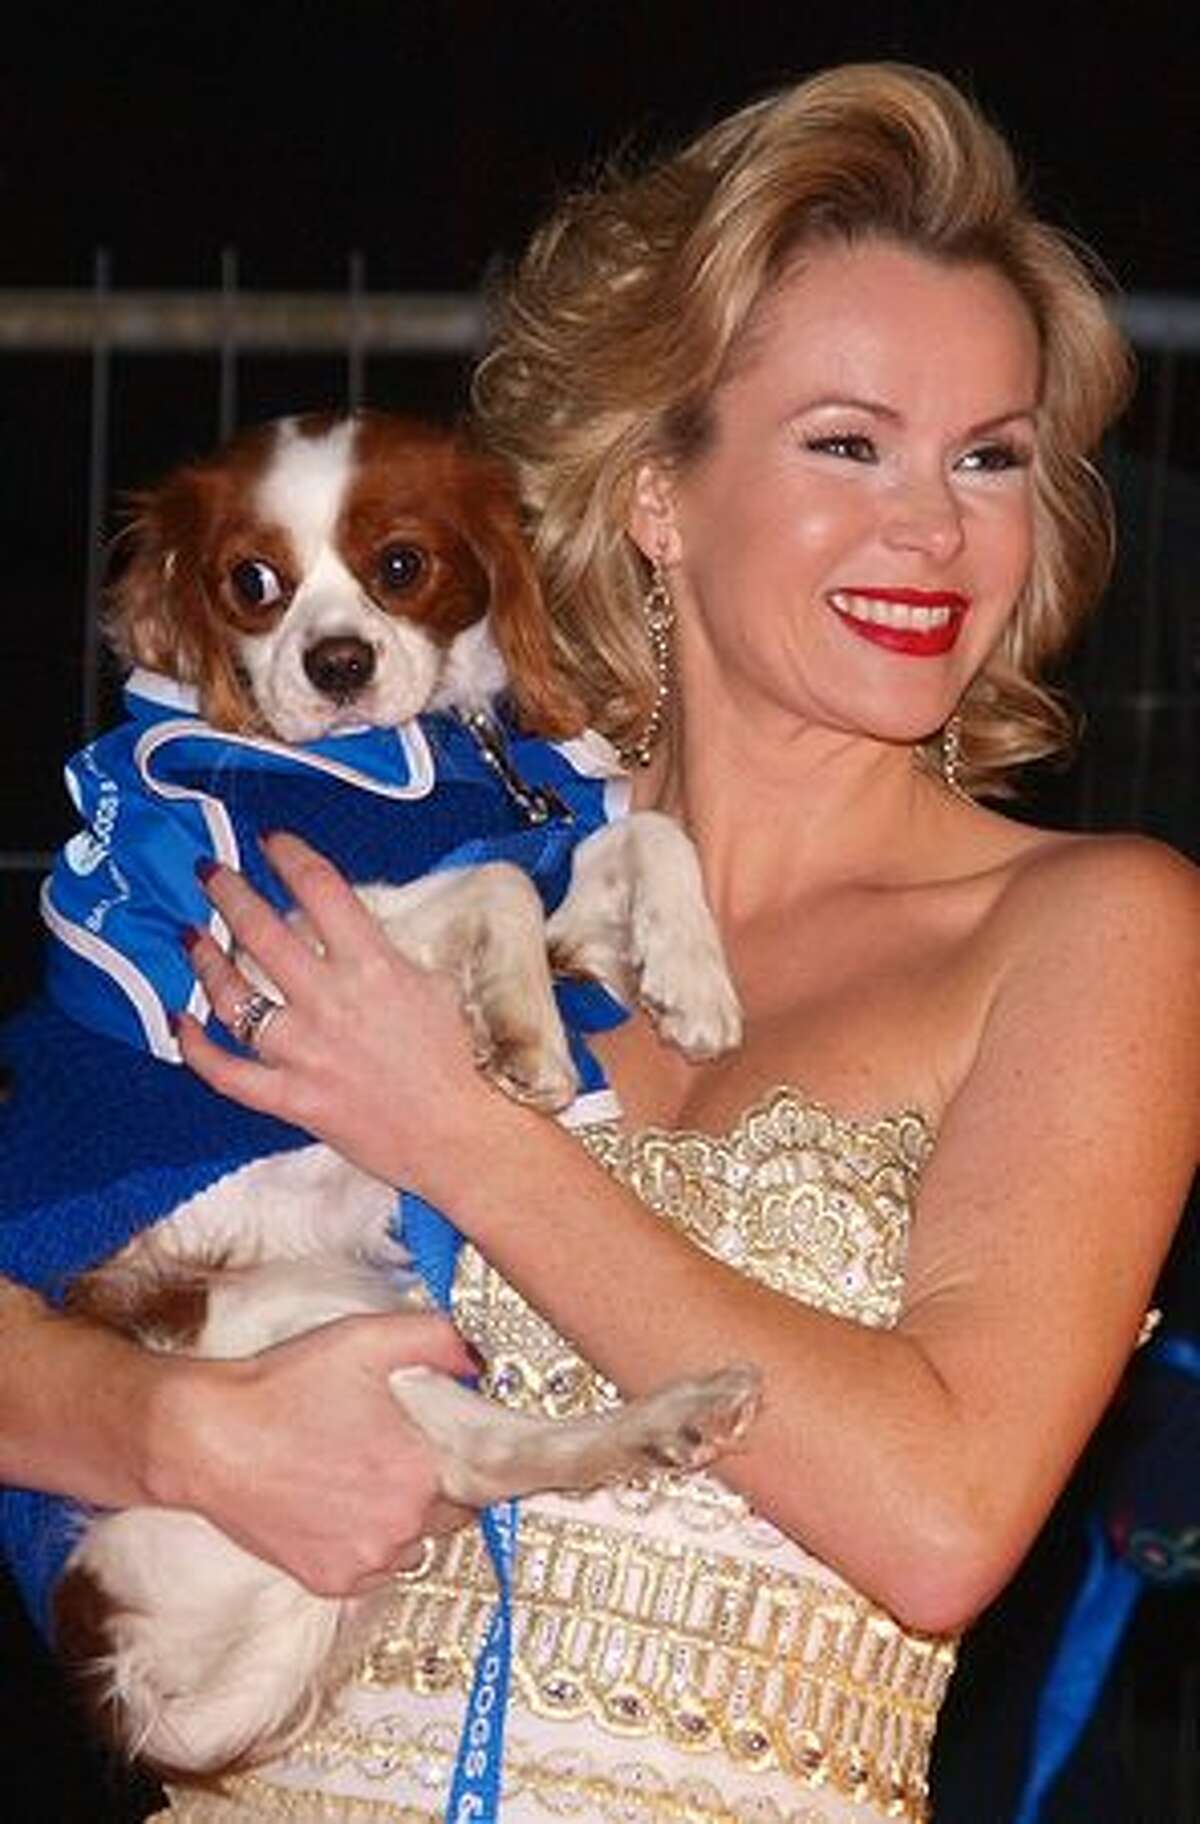 British actress Amanda Holden poses for pictures with 'Nancy,' a long haired Chihuahua, as she arrives for a charity ball to celebrate the 150th anniversary of the Battersea Dogs home, in London, on November 25, 2010.